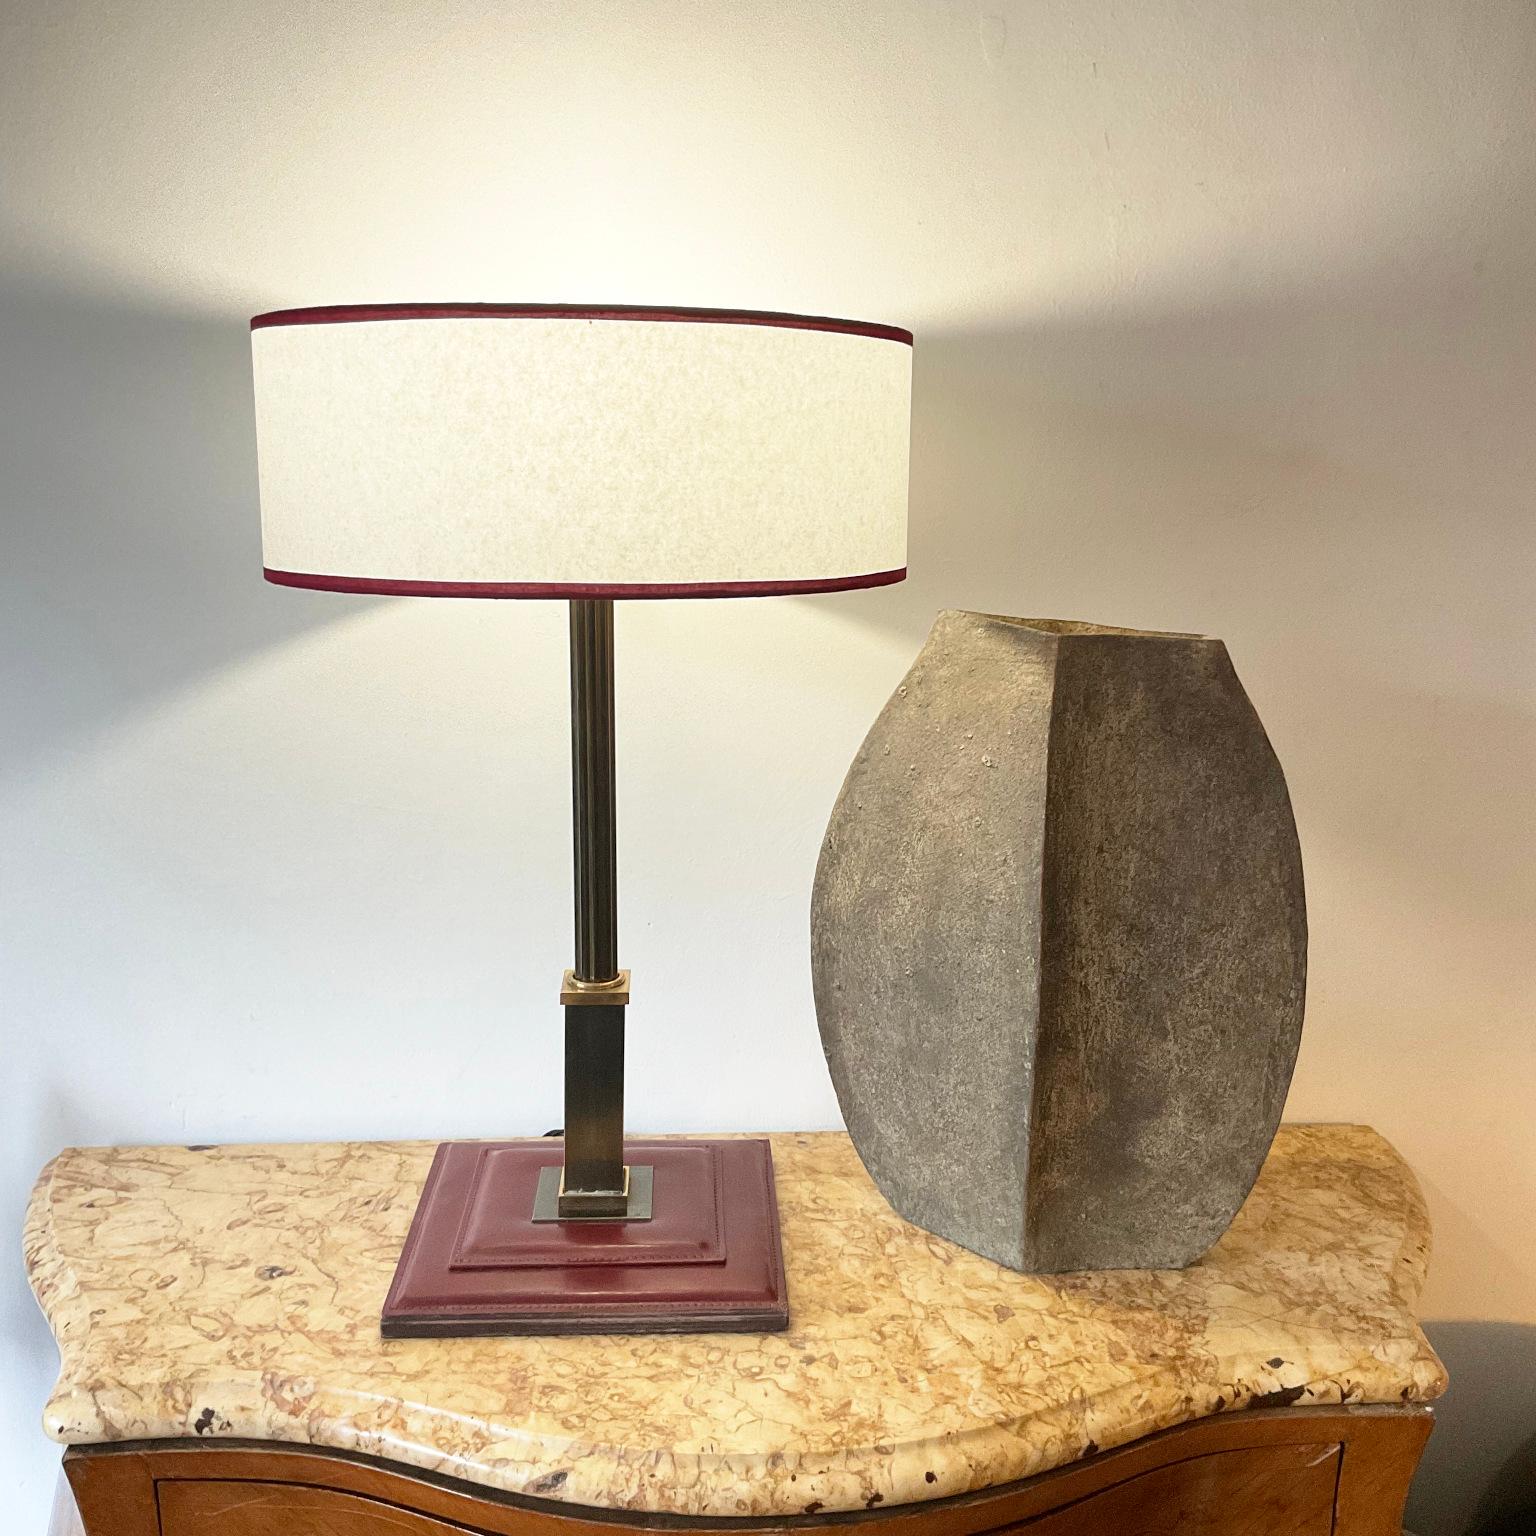 Neoclassical Revival 1950s Table Lamp Attributed to Maison Longchamp France in Burgundy Leather